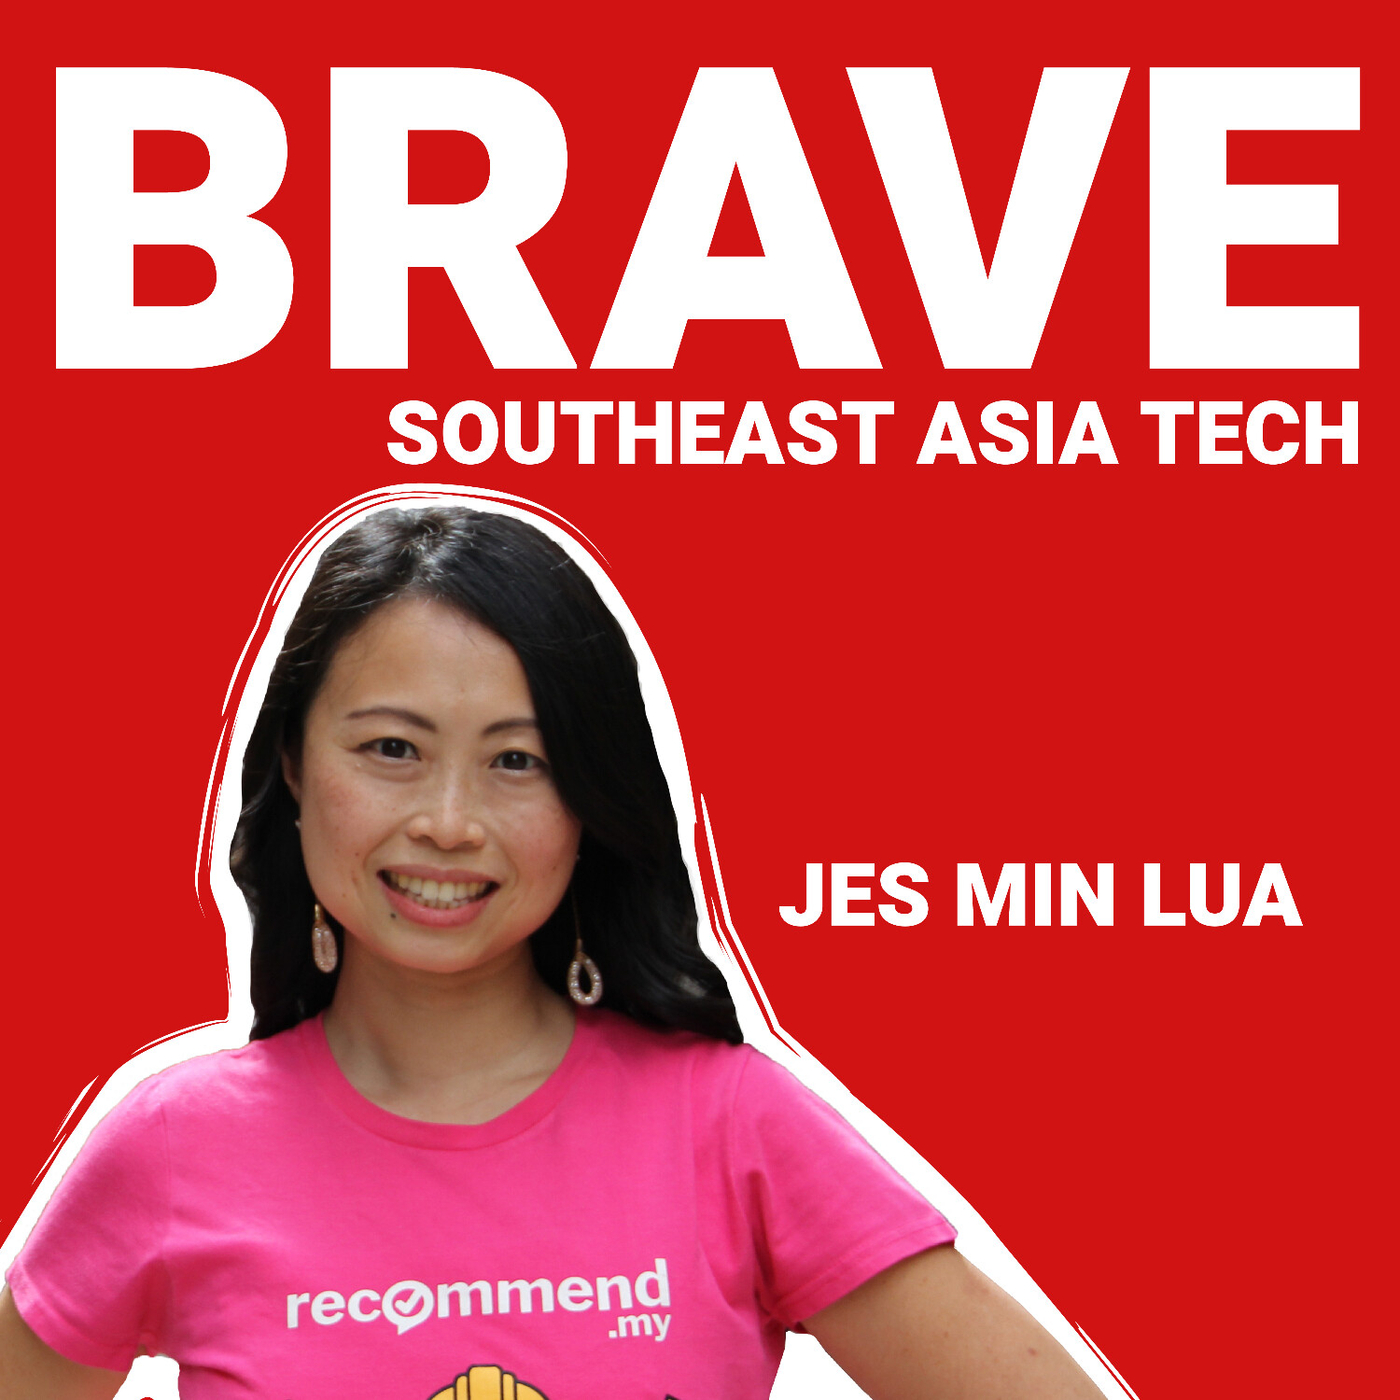 Malaysia Indonesia Marketplaces Consulting To Founder Pandemic Leadership Brave Southeast Asia Tech Singapore Indonesia Vietnam Thailand Philippines Malaysia Startups Podcast Co